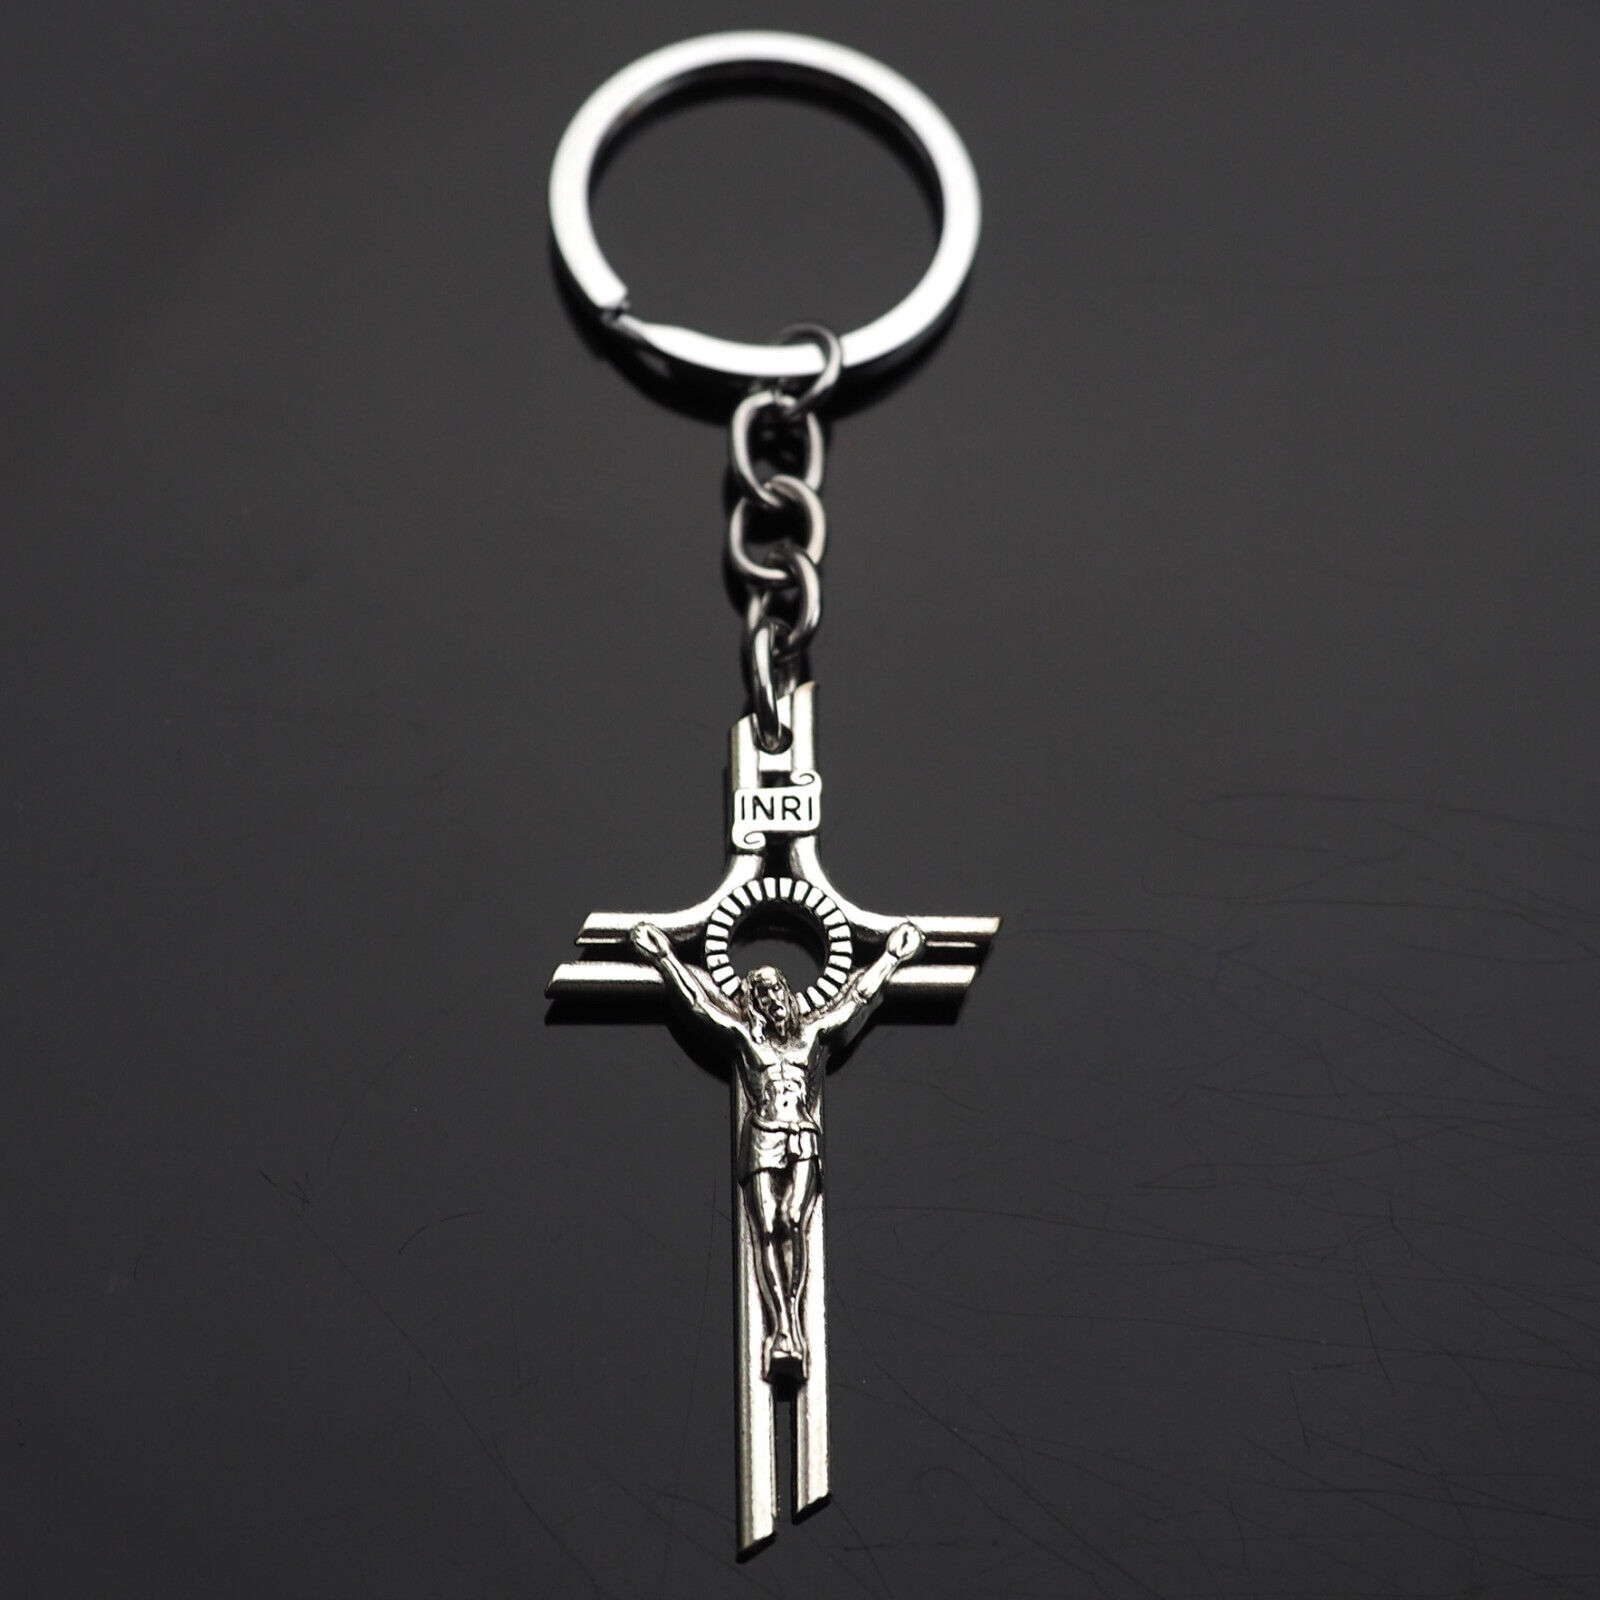 Jesus on the Cross INRI Design Silver Color Keychain Charm Pendant Key Ring Gift